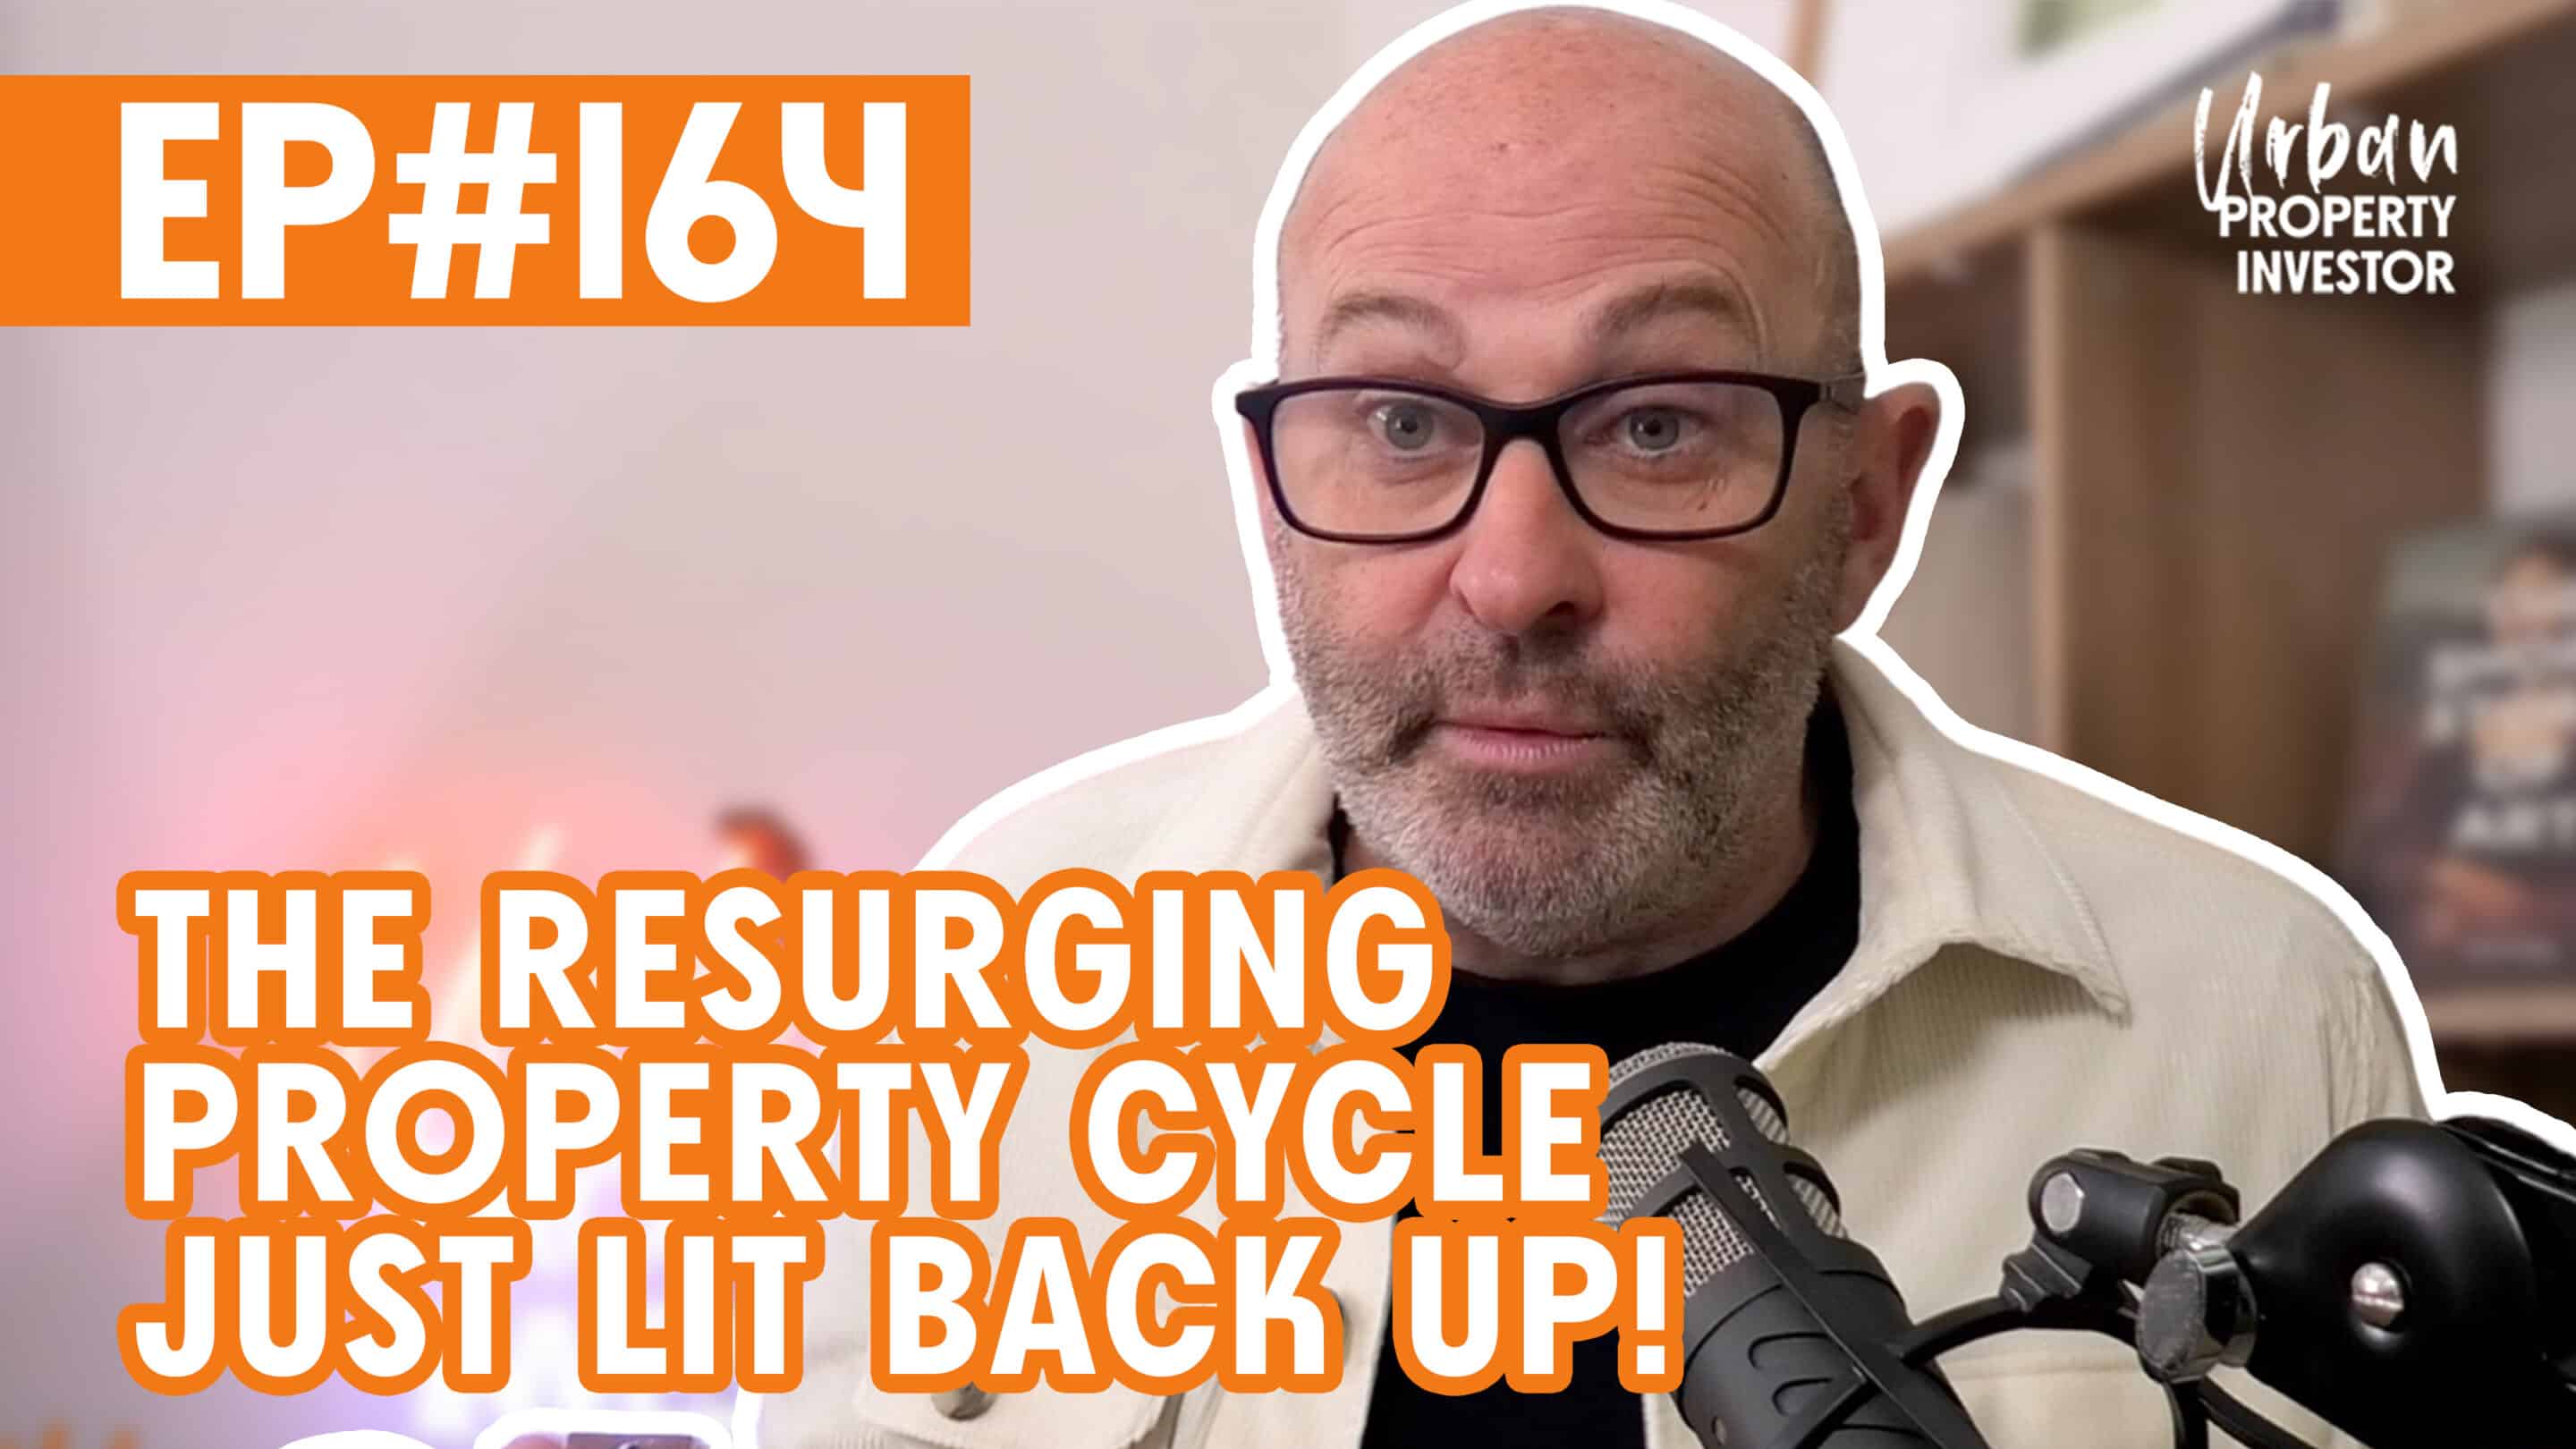 The Resurging Property Cycle Just Lit Back Up!